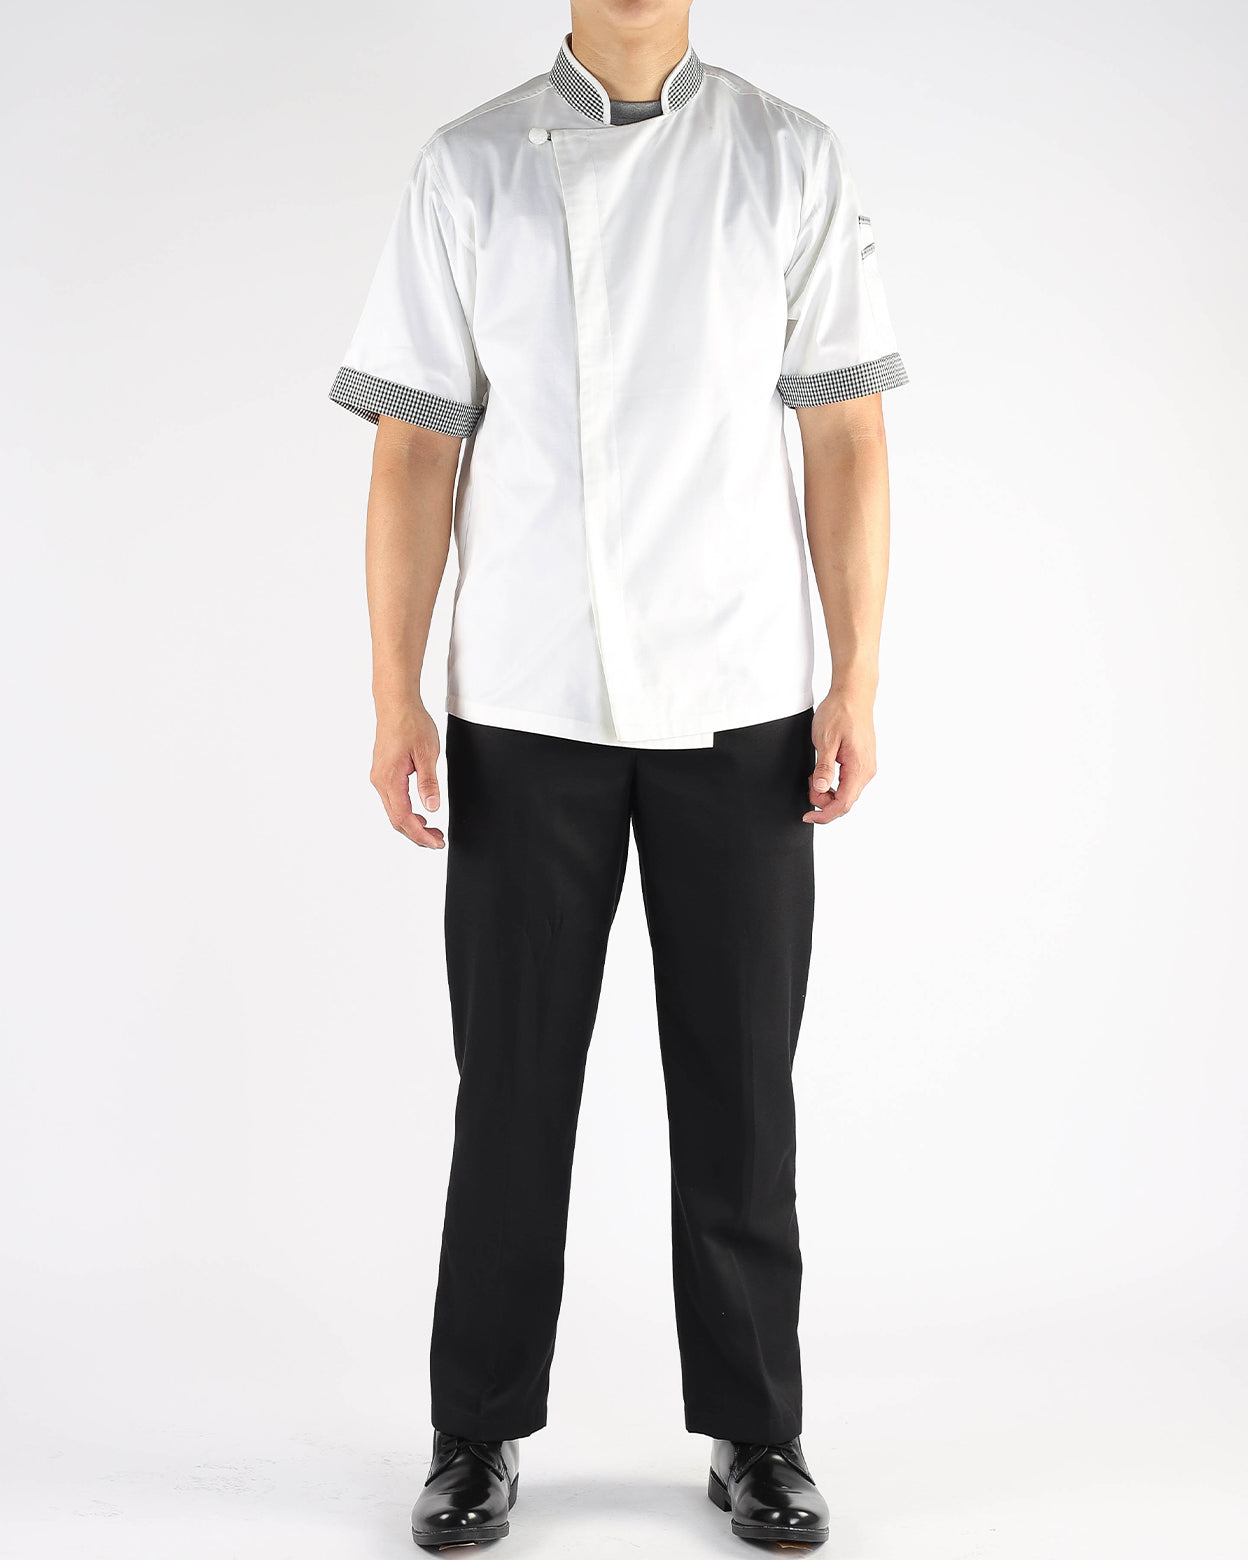 White Chef Jacket with Short Sleeves